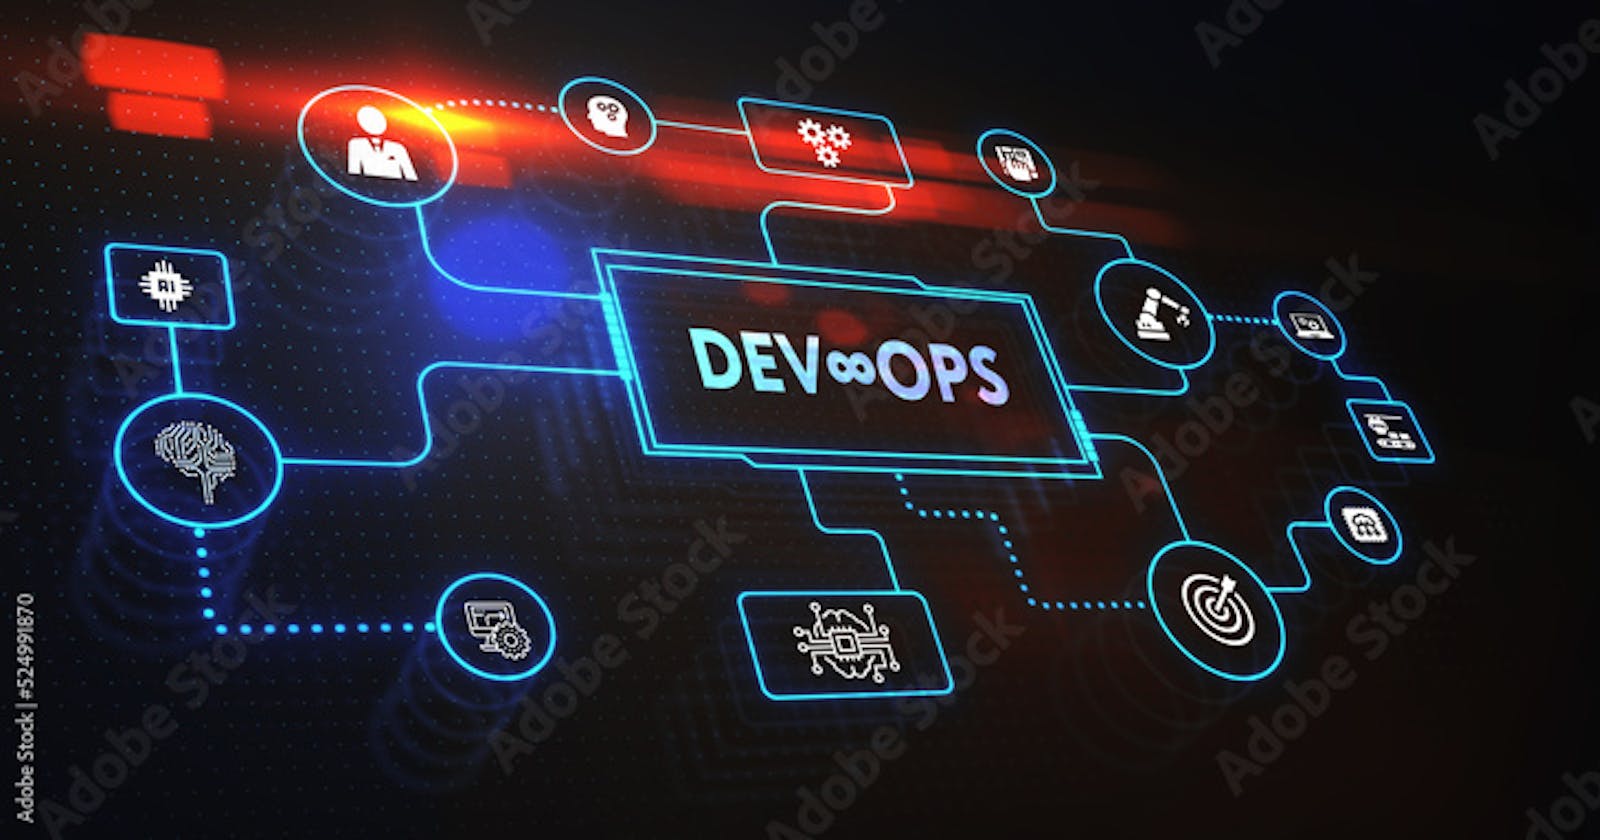 How DevOps came into existence!